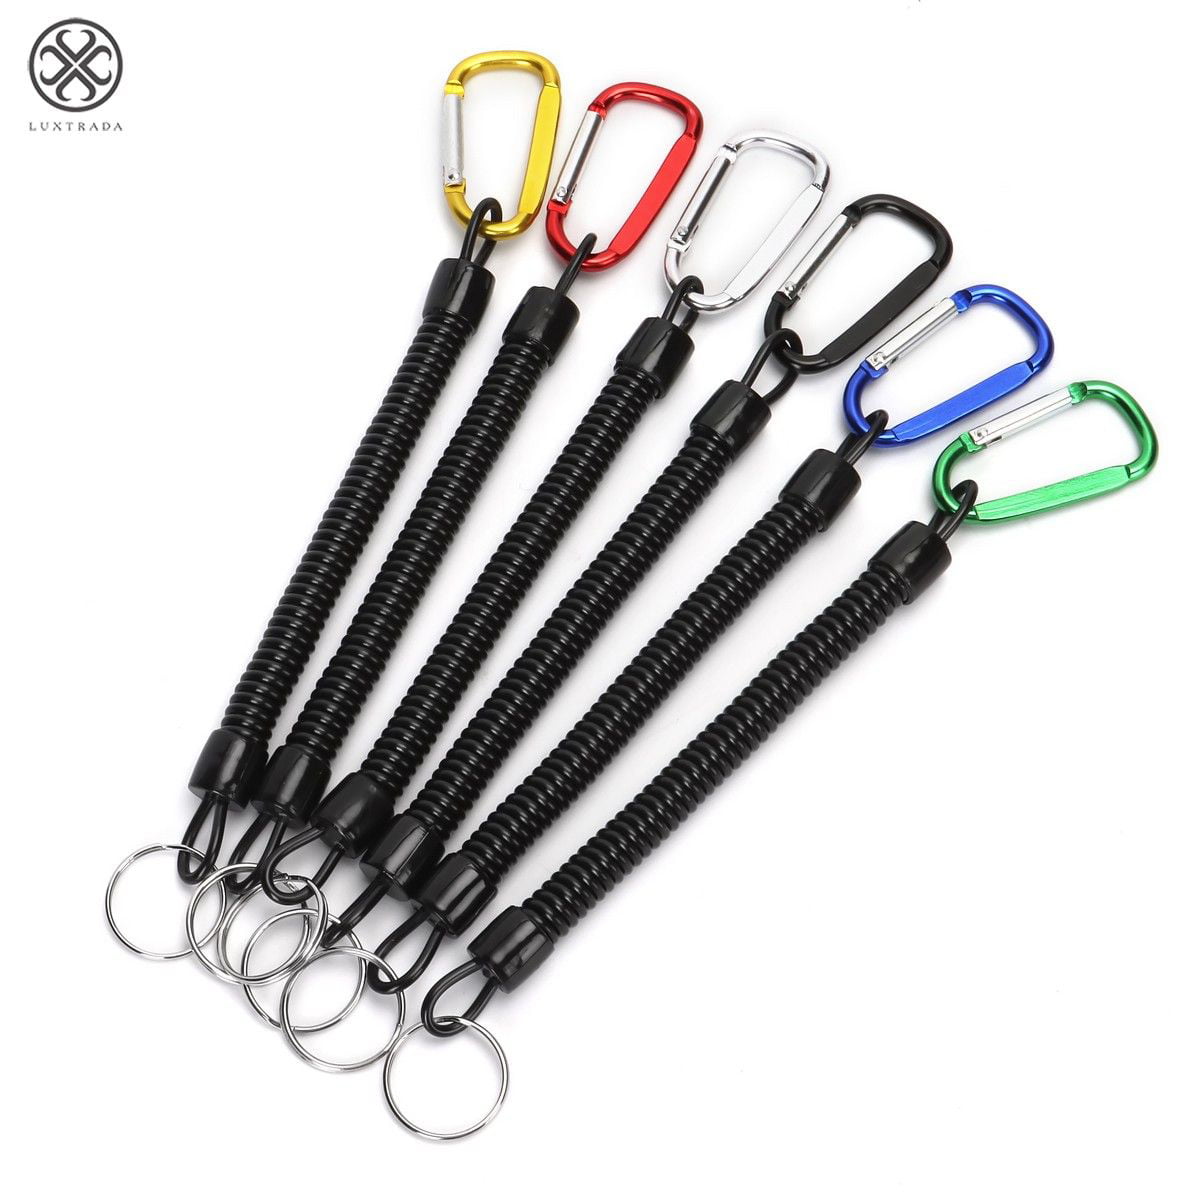 Retractable Rope Secure Pliers Lanyard Coiled Fishing Camping Tools Practical 